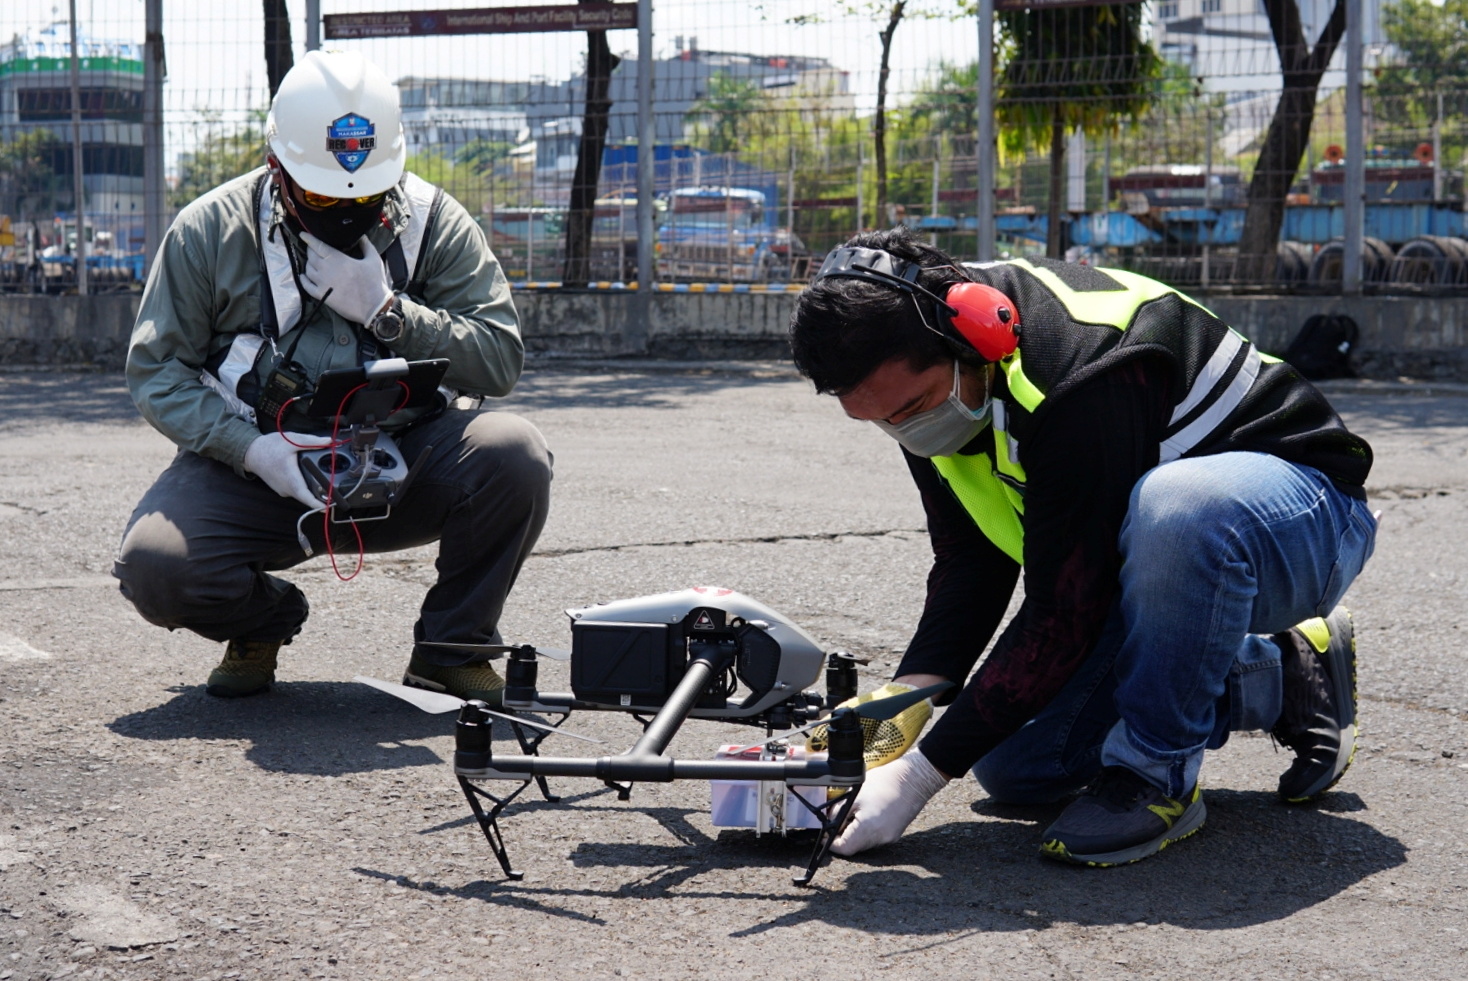 Indonesian drone enthusiasts fly medicine and supplies to isolating COVID-19 patients